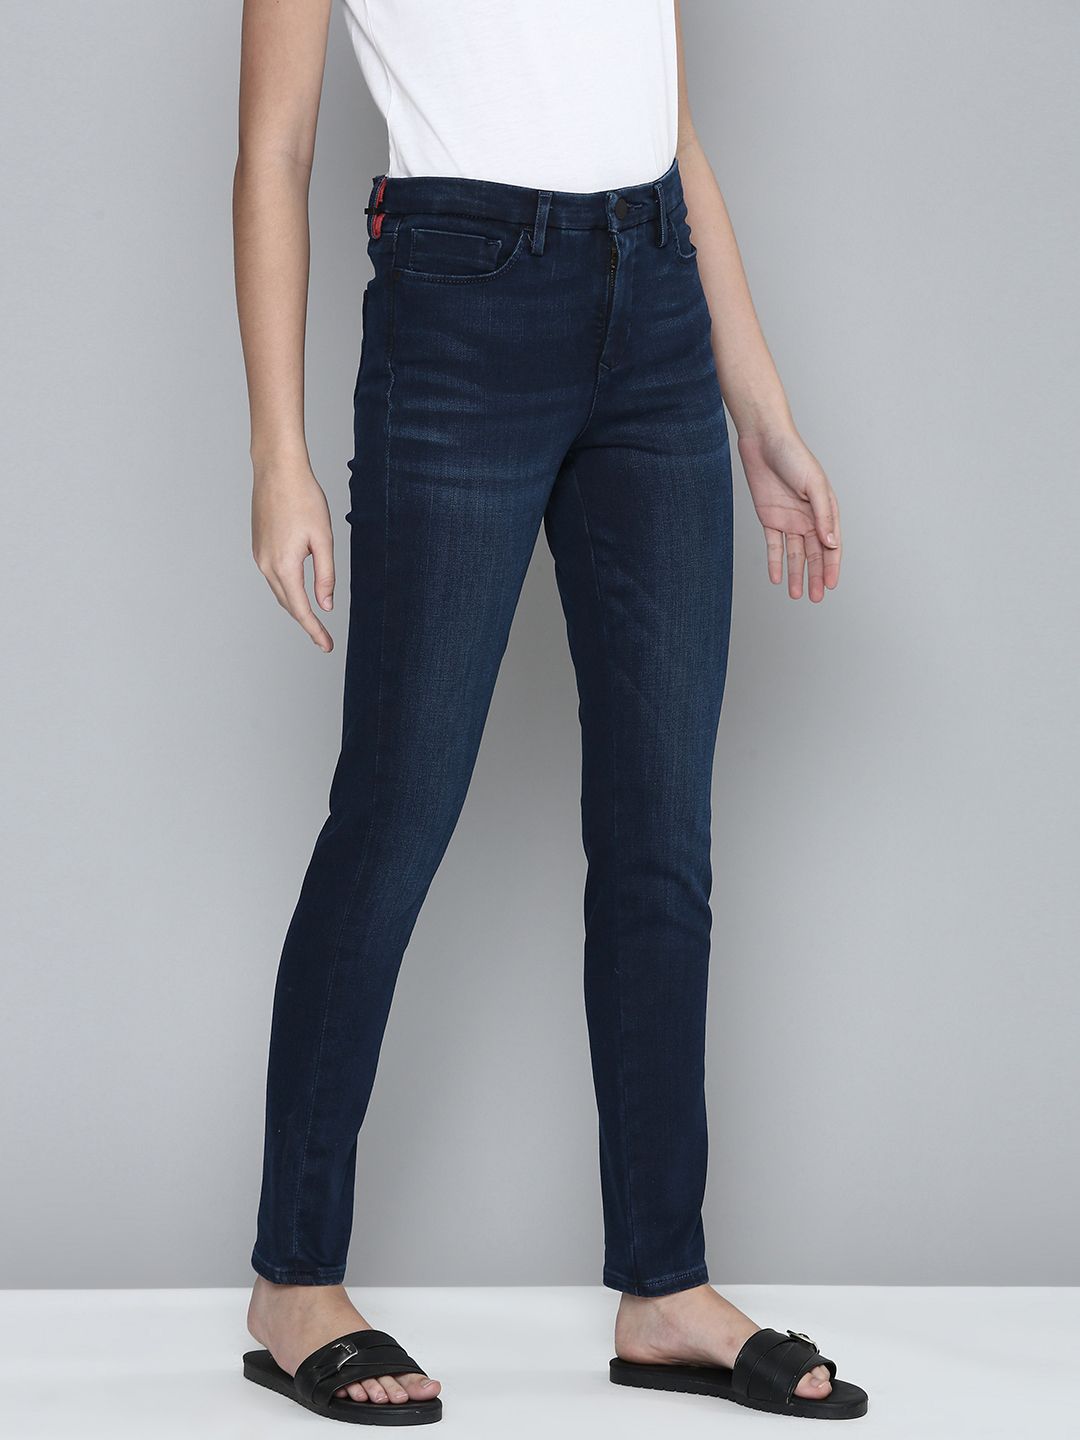 Levis Women Navy Blue Skinny Fit High-Rise Light Fade Stretchable Casual Jeans Price in India